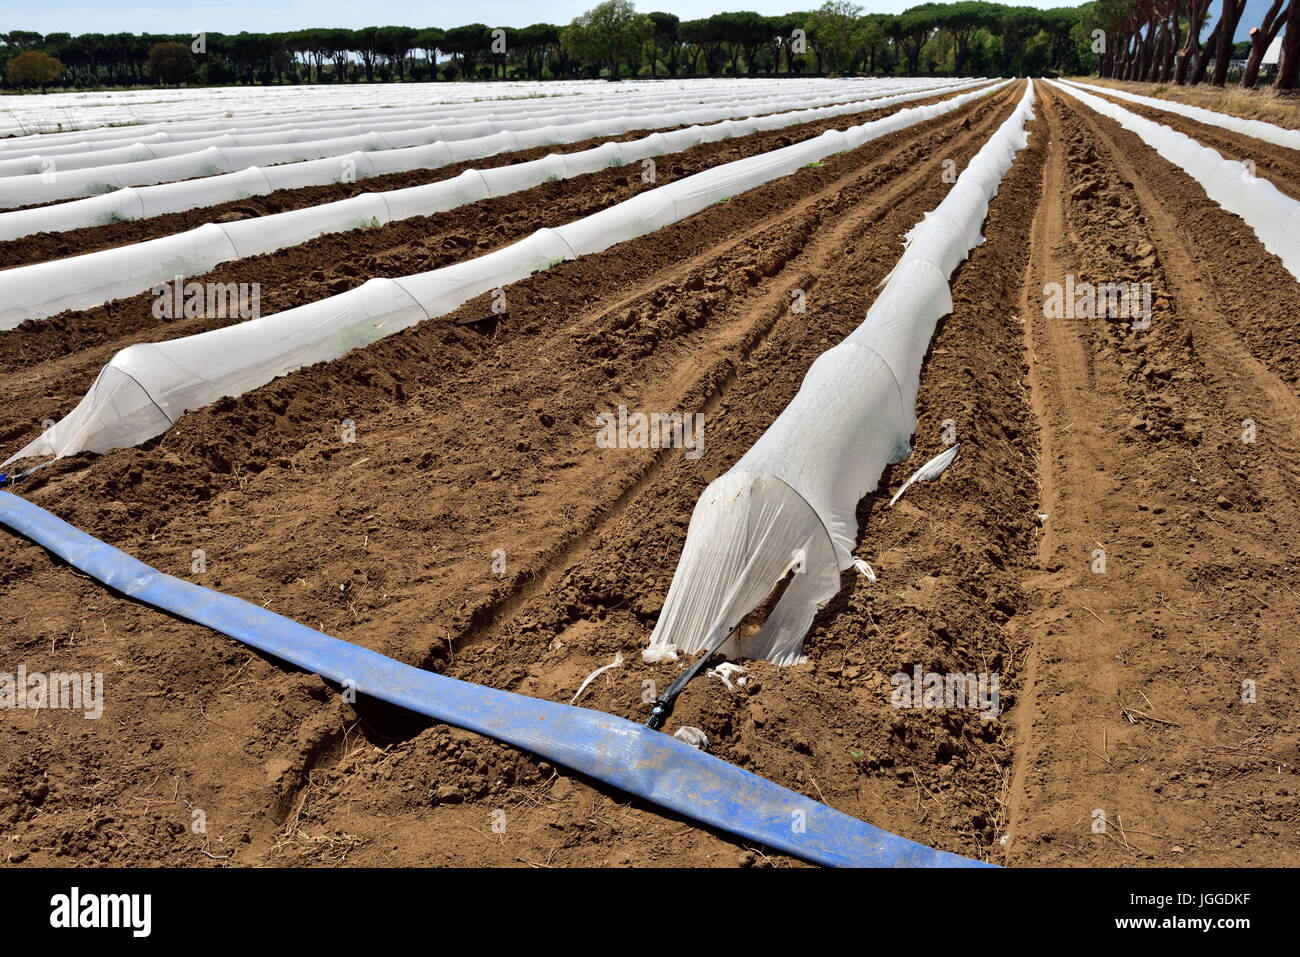 Commercial agricultural field with horticultural polythene fleece film cloches to conserve water and protect new young plants Stock Photo